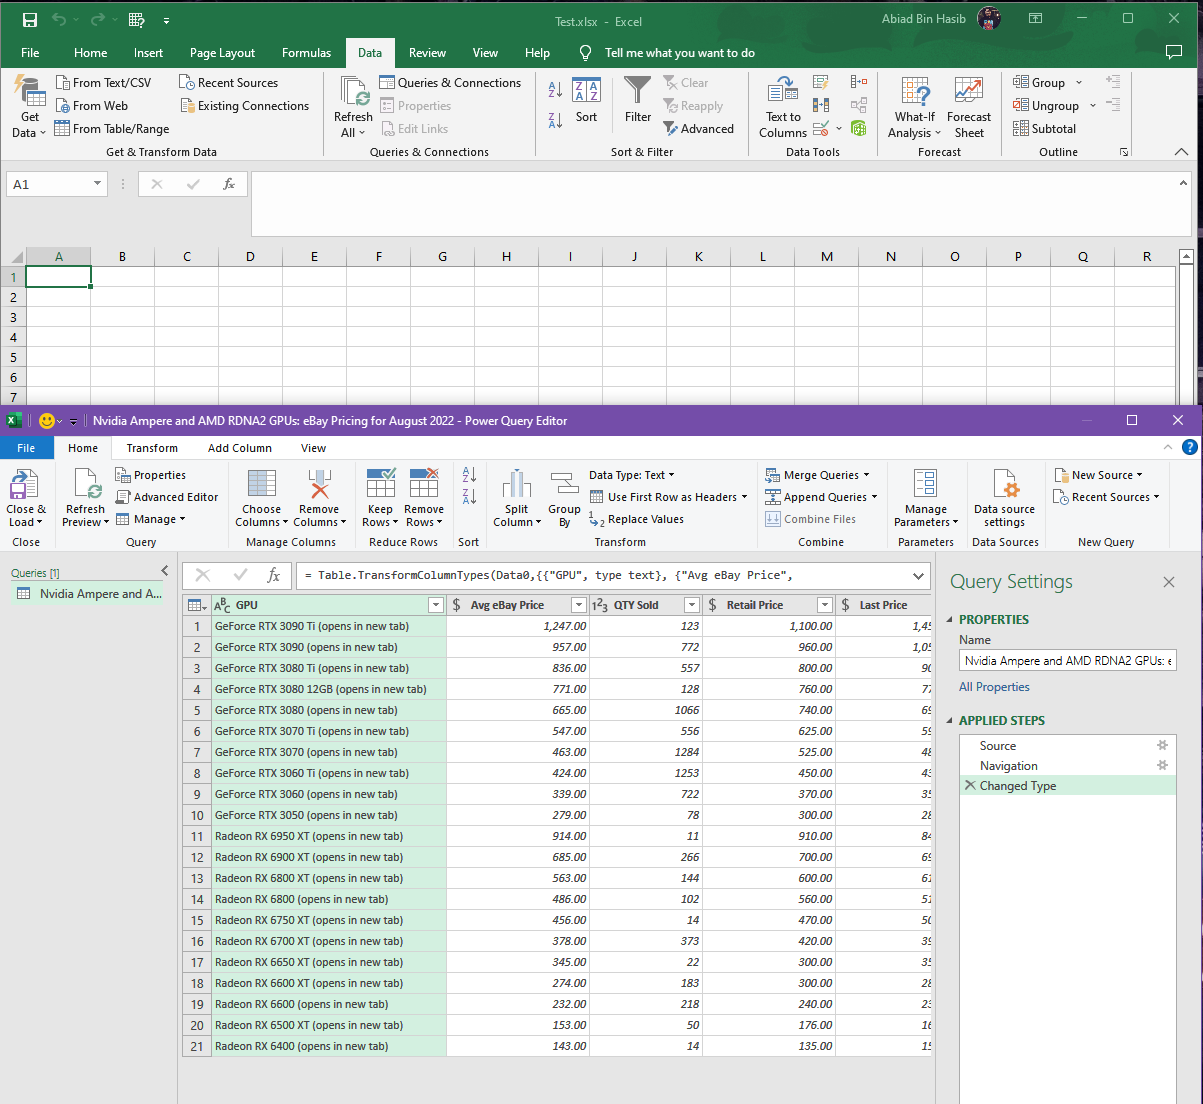 Scrape Data from Websites To Excel: Step 3 - Transform